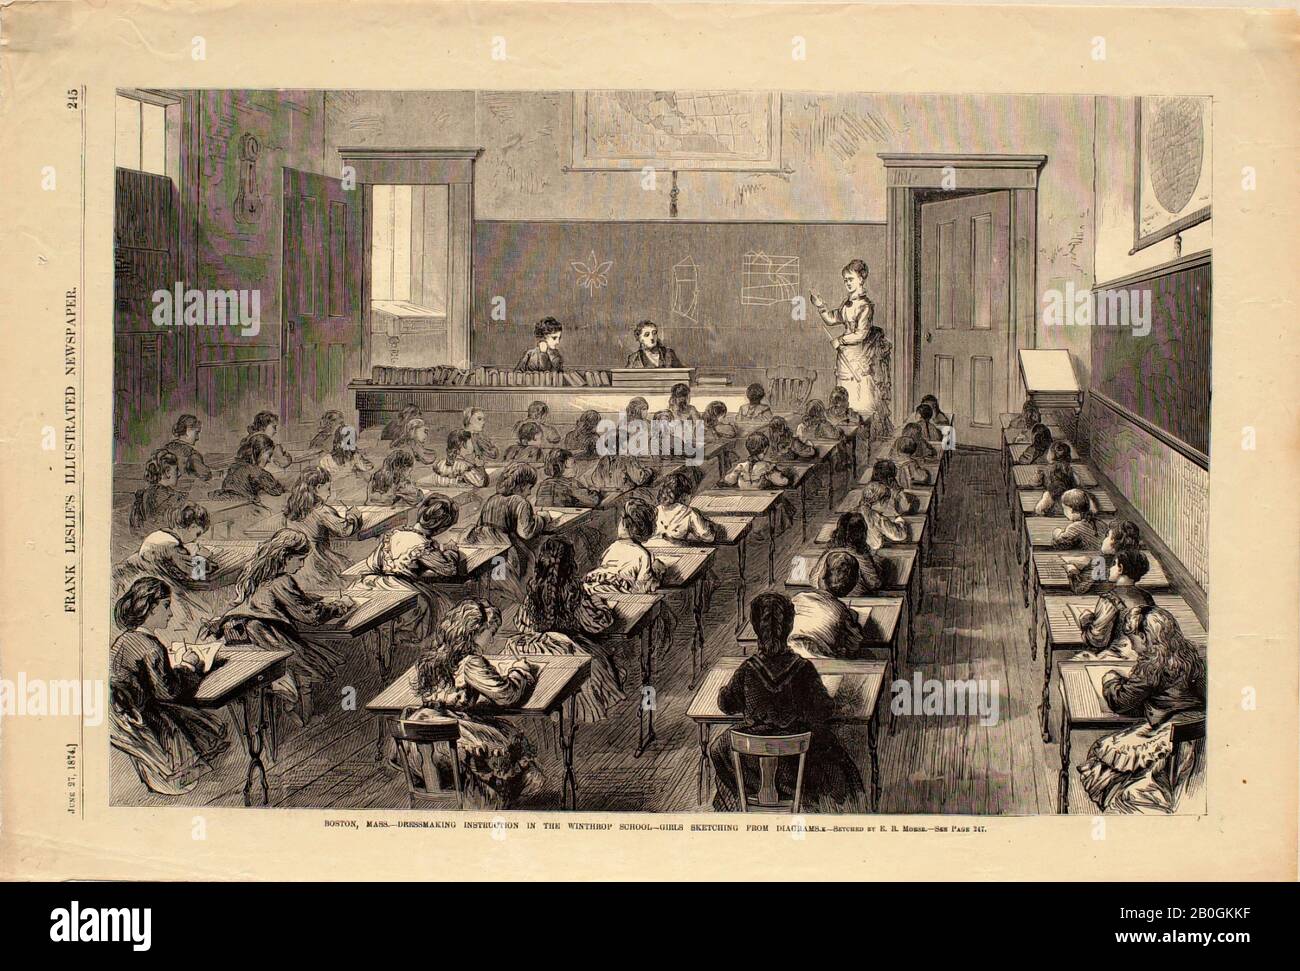 E. R. Morse, American, 19th Century, Boston, Mass.-Dressing Instruction in the Winthrop School - Girls Sketching from Diagrams, From Frank Leslie's Illustrated Newspaper, 1874, Wood incisione su carta, immagine: 9 1/8 x 13 7/8 in. (23,1 x 35,3 cm Foto Stock